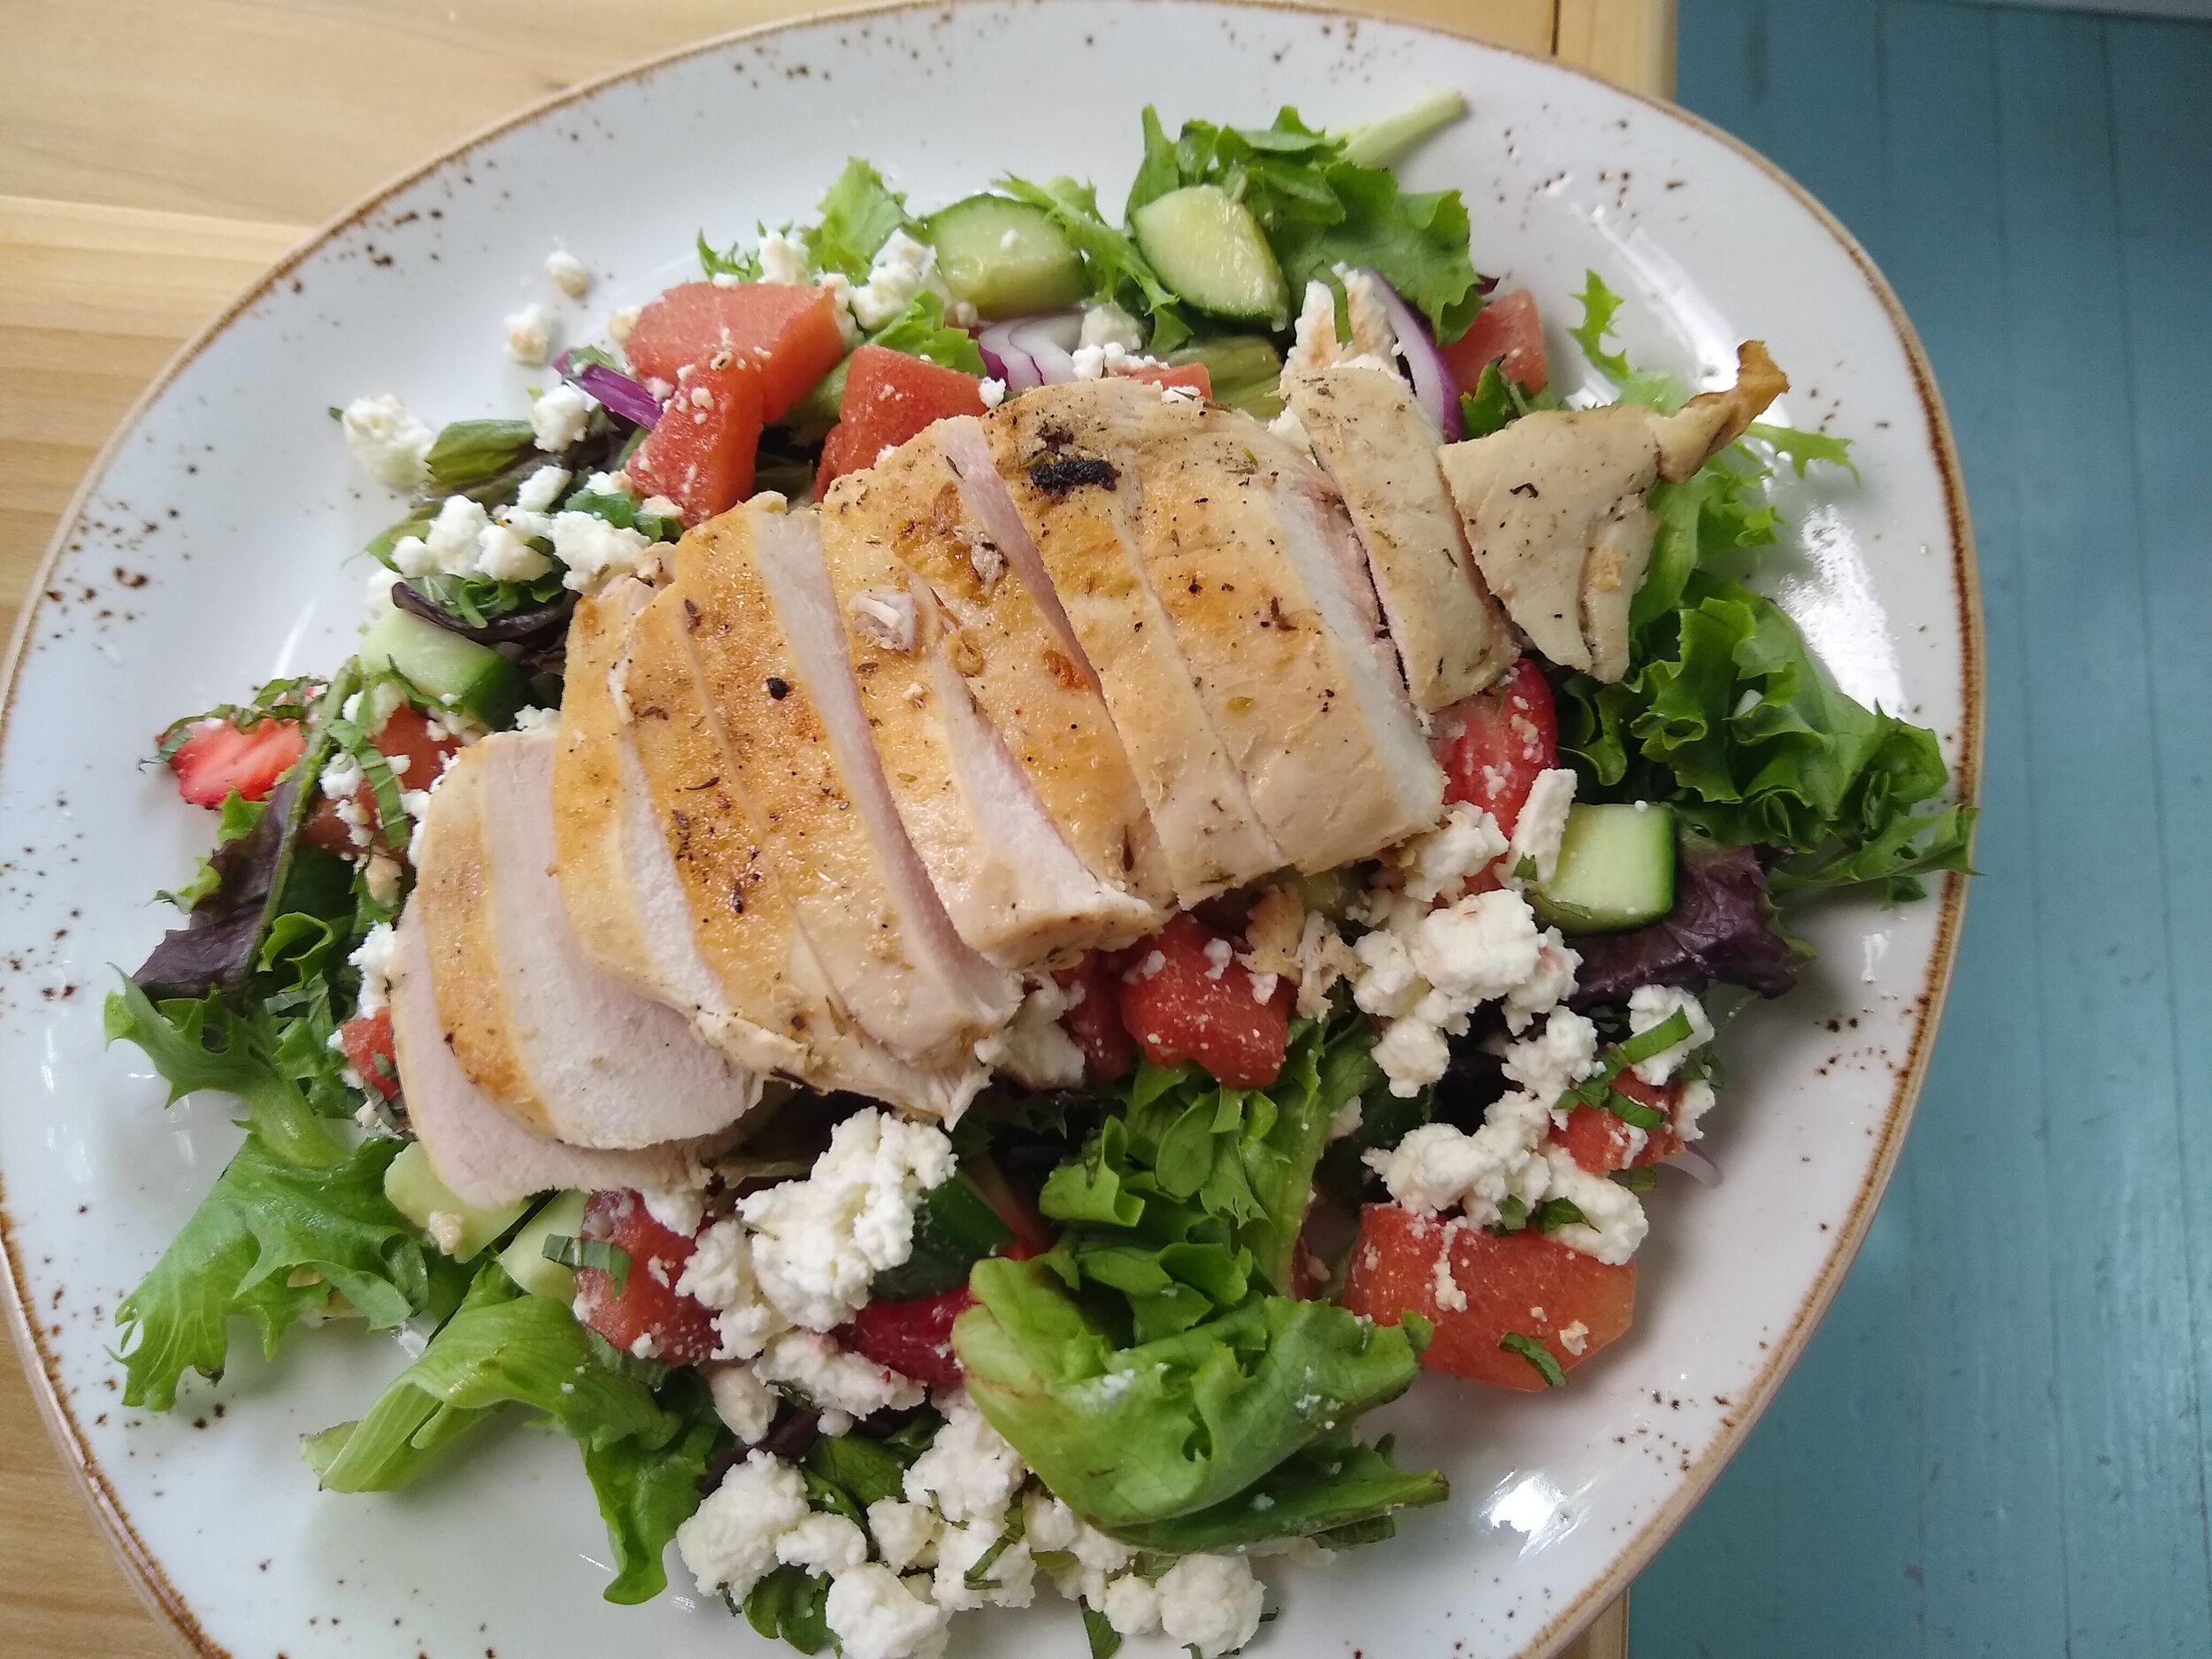 Grilled Chicken over Salad Greens with Marinated Watermelon, Cucumber, Red Onion and Feta Cheese.jpg